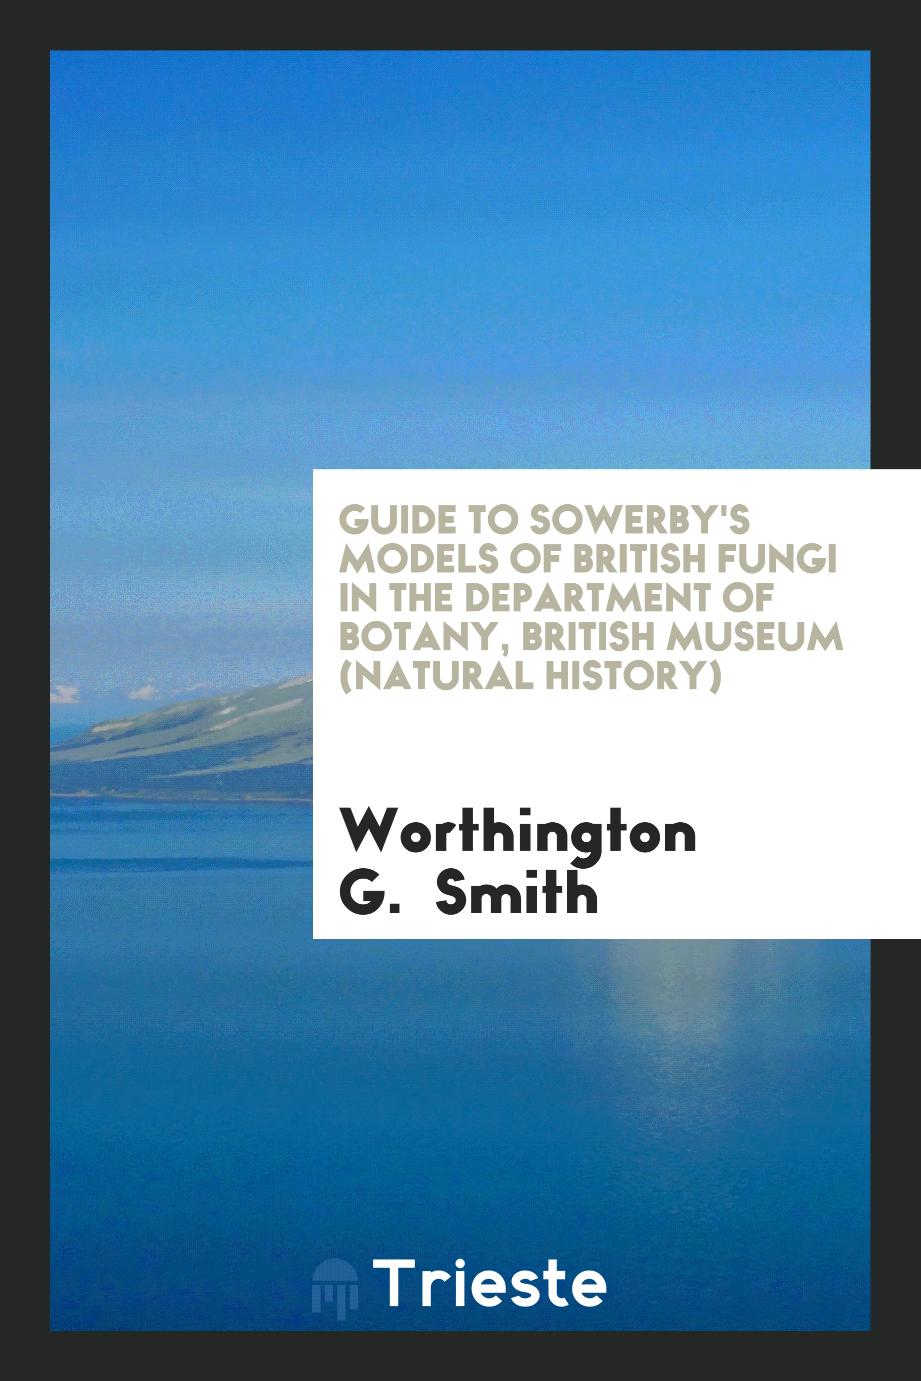 Guide to Sowerby's models of British fungi in the Department of botany, British Museum (Natural History)